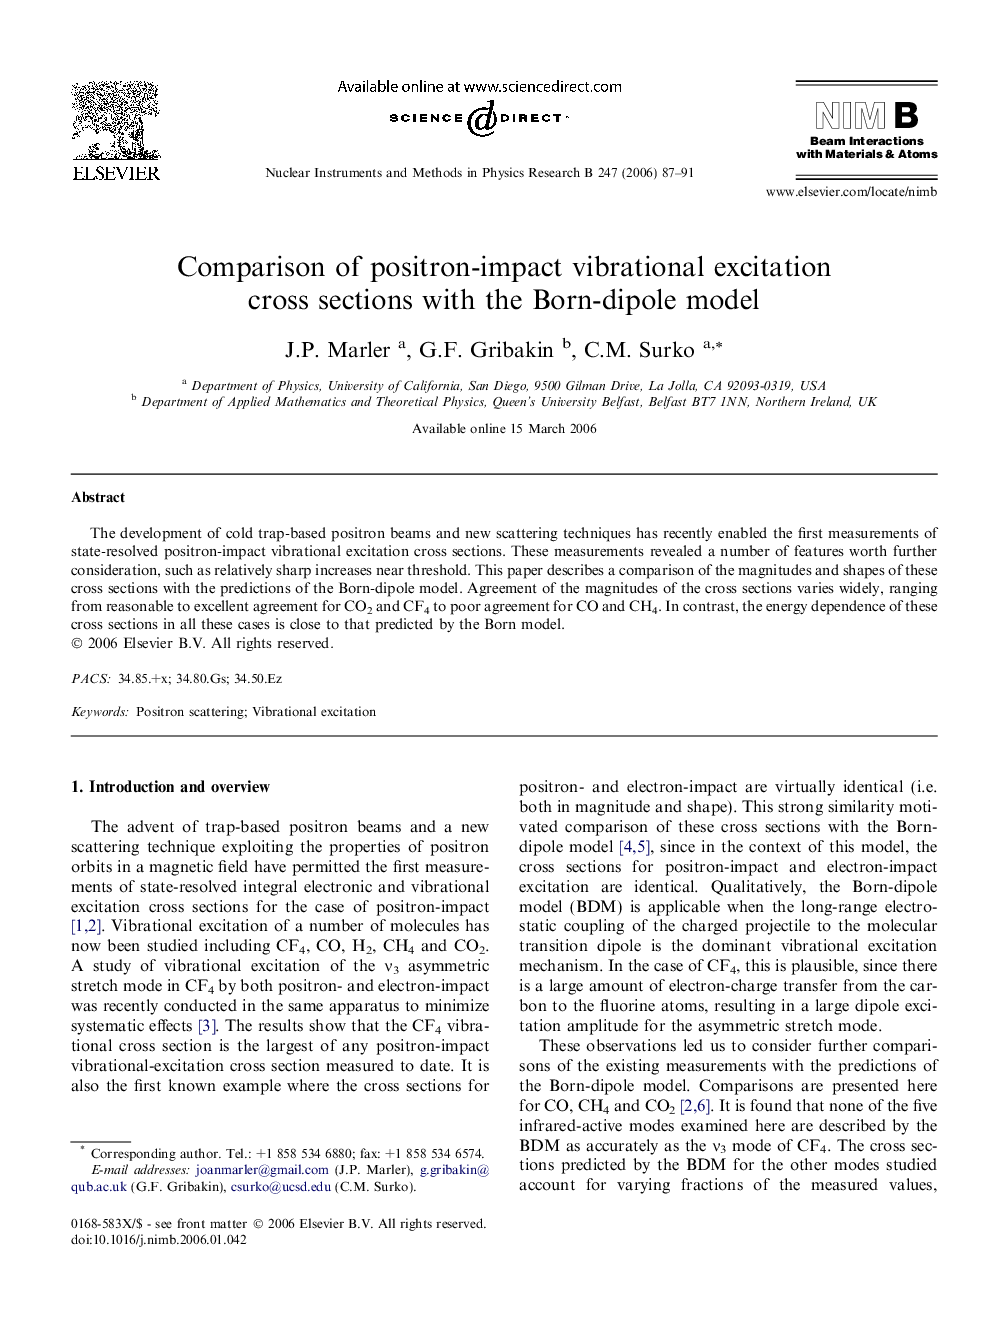 Comparison of positron-impact vibrational excitation cross sections with the Born-dipole model